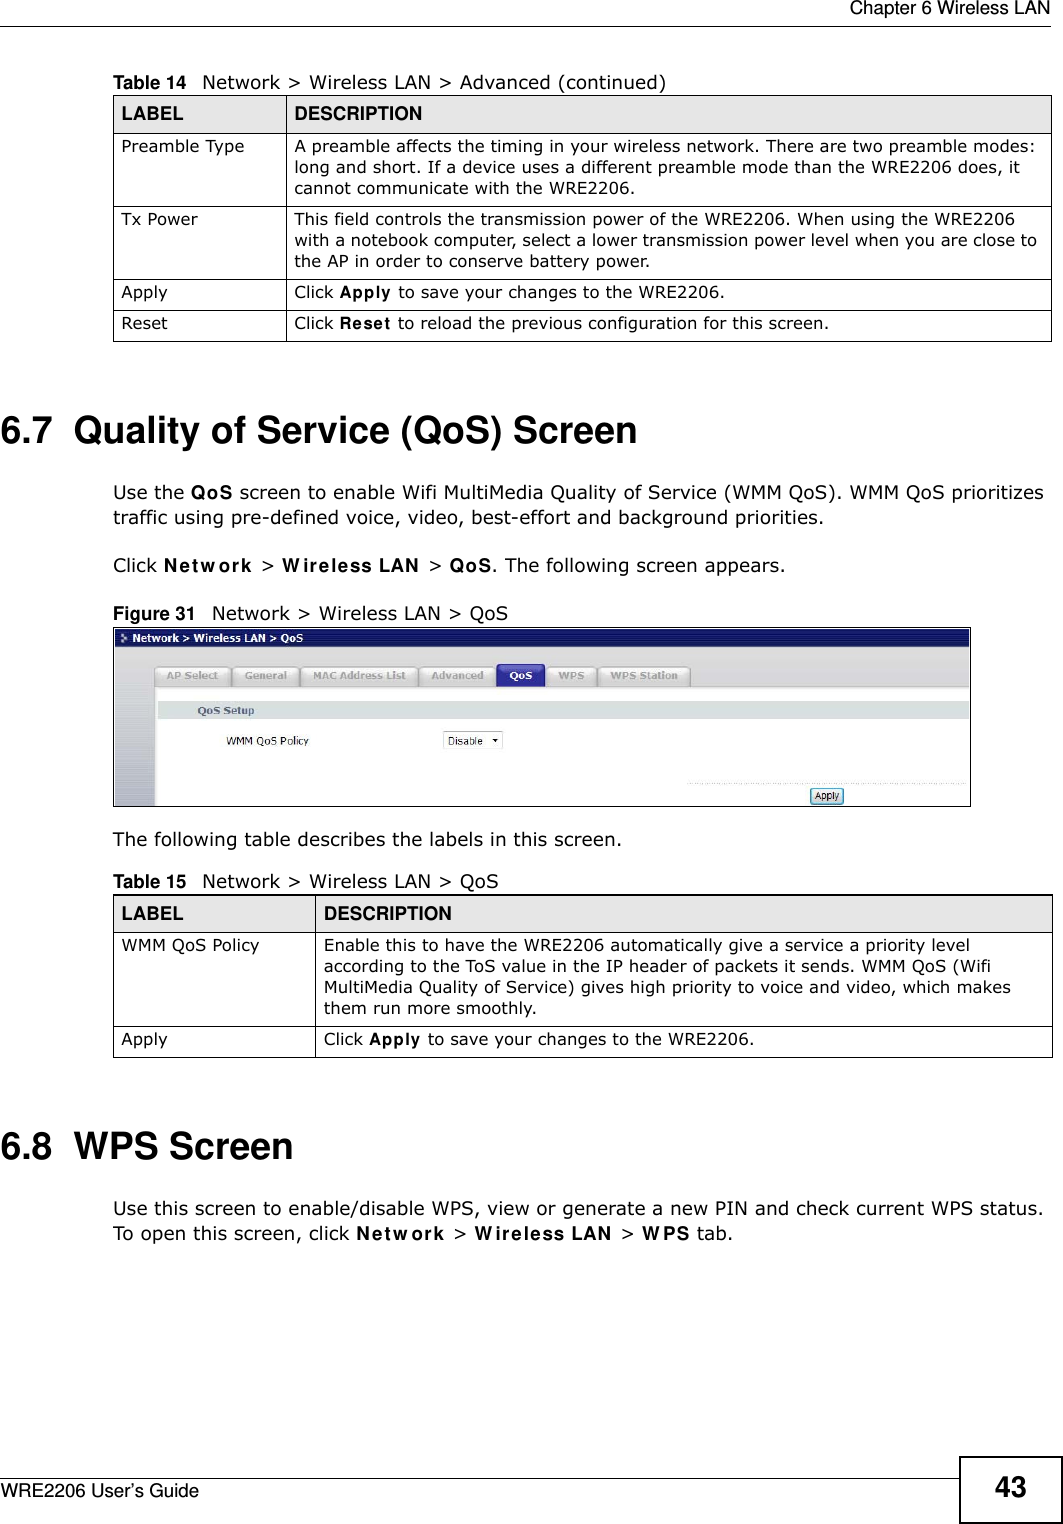  Chapter 6 Wireless LANWRE2206 User’s Guide 436.7  Quality of Service (QoS) ScreenUse the QoS screen to enable Wifi MultiMedia Quality of Service (WMM QoS). WMM QoS prioritizes traffic using pre-defined voice, video, best-effort and background priorities.Click N e t w or k &gt; W ir e le ss LAN &gt; QoS. The following screen appears.Figure 31   Network &gt; Wireless LAN &gt; QoS The following table describes the labels in this screen. 6.8  WPS ScreenUse this screen to enable/disable WPS, view or generate a new PIN and check current WPS status. To open this screen, click Net w ork &gt; W ir e le ss LAN &gt; W PS tab.Preamble Type A preamble affects the timing in your wireless network. There are two preamble modes: long and short. If a device uses a different preamble mode than the WRE2206 does, it cannot communicate with the WRE2206.Tx Power This field controls the transmission power of the WRE2206. When using the WRE2206 with a notebook computer, select a lower transmission power level when you are close to the AP in order to conserve battery power.Apply Click Apply to save your changes to the WRE2206.Reset Click Reset  to reload the previous configuration for this screen.Table 14   Network &gt; Wireless LAN &gt; Advanced (continued)LABEL DESCRIPTIONTable 15   Network &gt; Wireless LAN &gt; QoSLABEL DESCRIPTIONWMM QoS Policy Enable this to have the WRE2206 automatically give a service a priority level according to the ToS value in the IP header of packets it sends. WMM QoS (Wifi MultiMedia Quality of Service) gives high priority to voice and video, which makes them run more smoothly.Apply Click Apply to save your changes to the WRE2206.